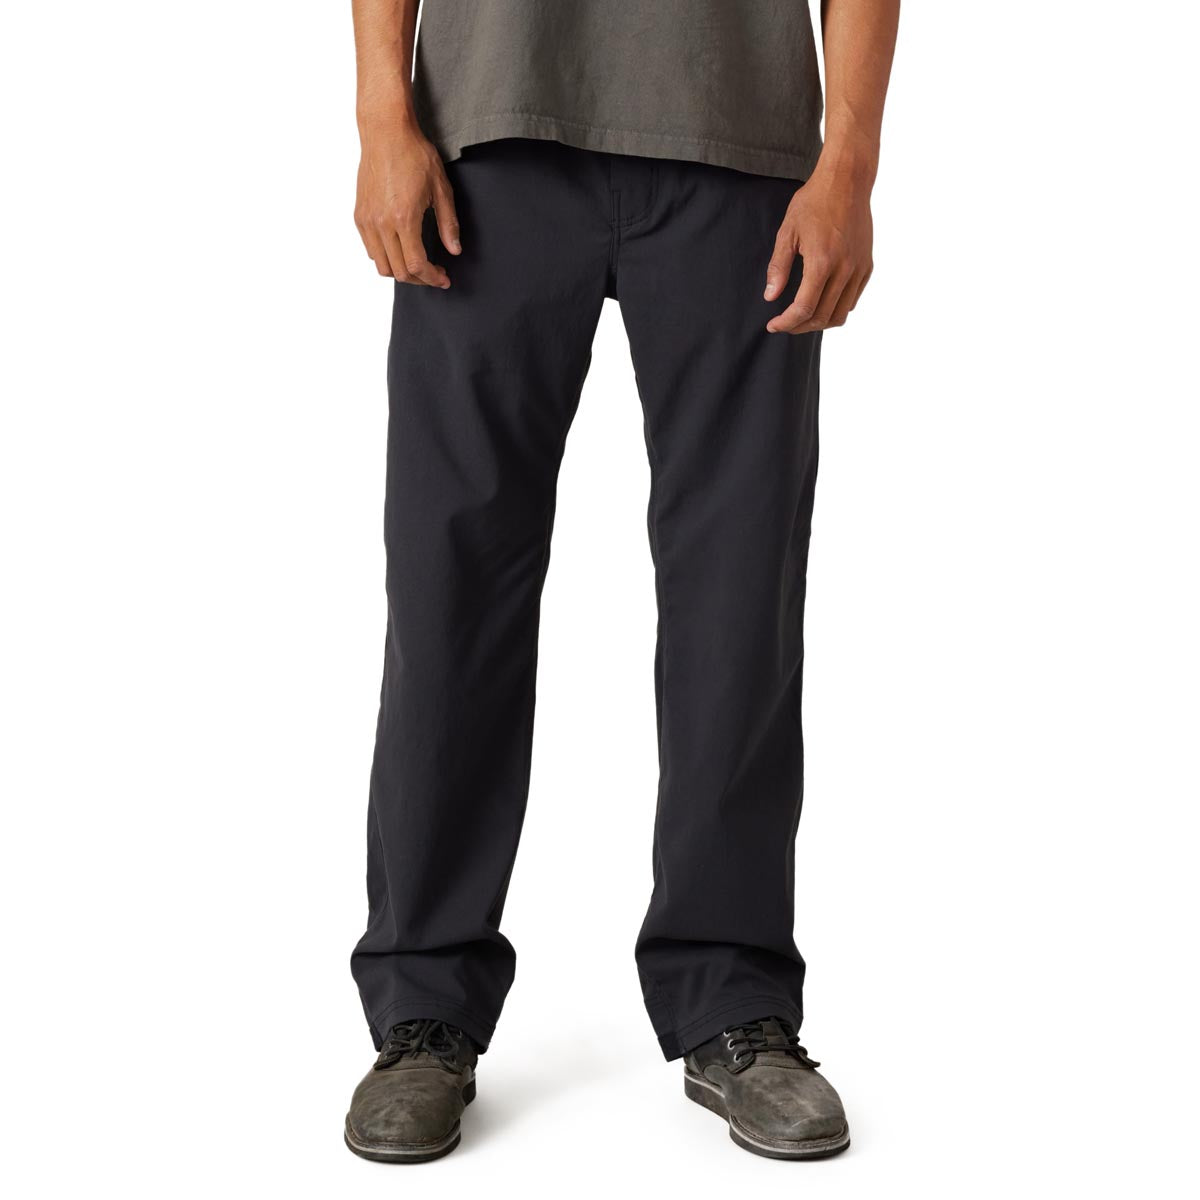 686 Everywhere Unwork Relaxed Fit Pants - Off Black image 1